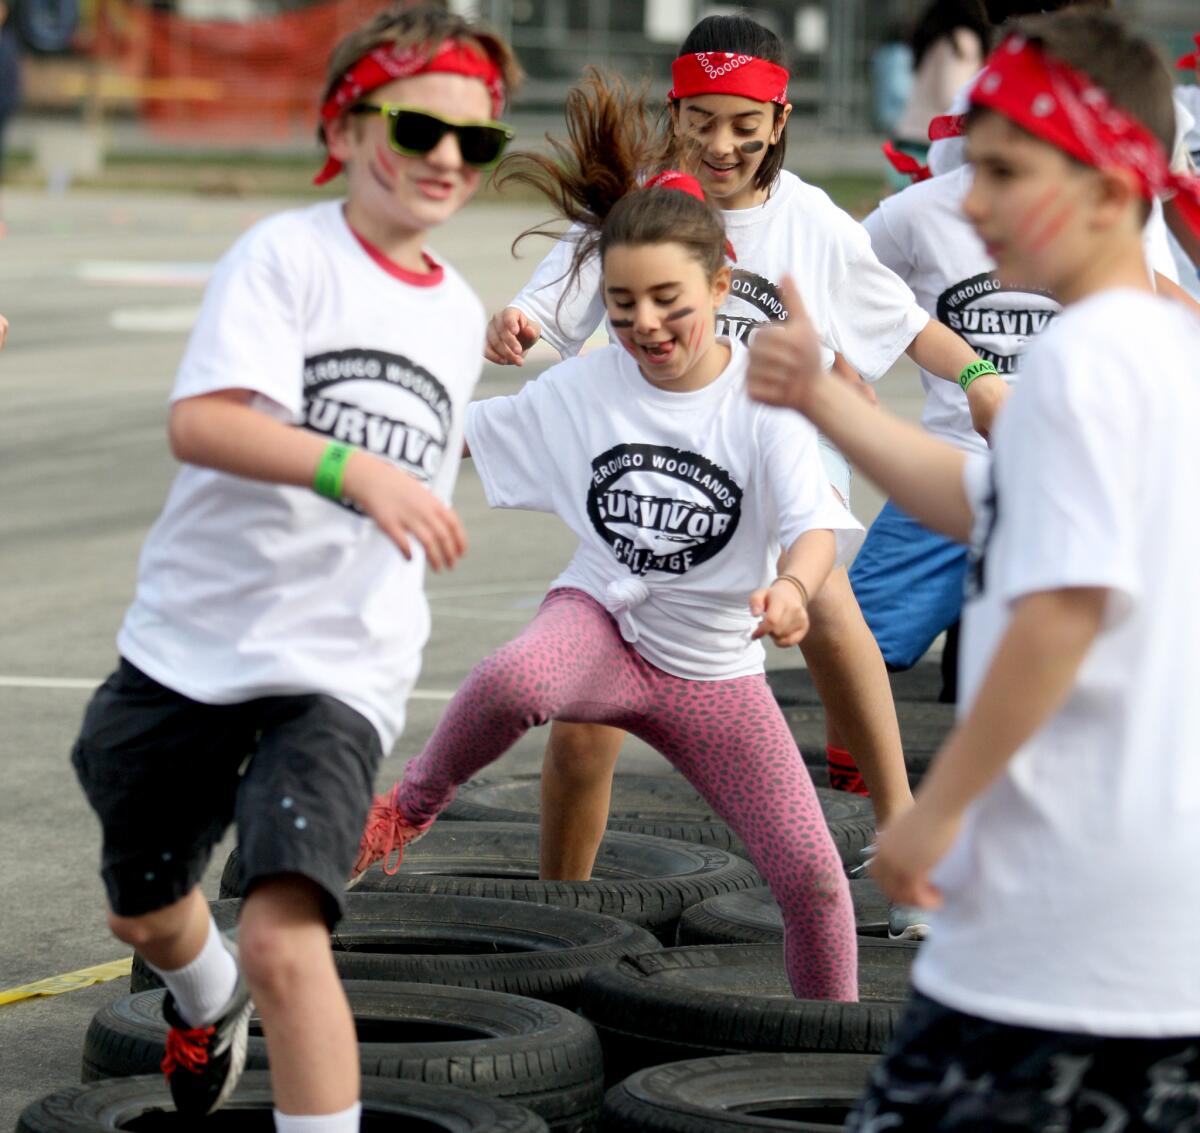 Fifth-grade teacher Katie Turner's students, including Lillian Mehrabians, center, goes through the tire obstacle course at Verdugo Woodlands Elementary School's annual Survivor Challenge fundraiser, at the school in Glendale on Friday, March 4, 2016.